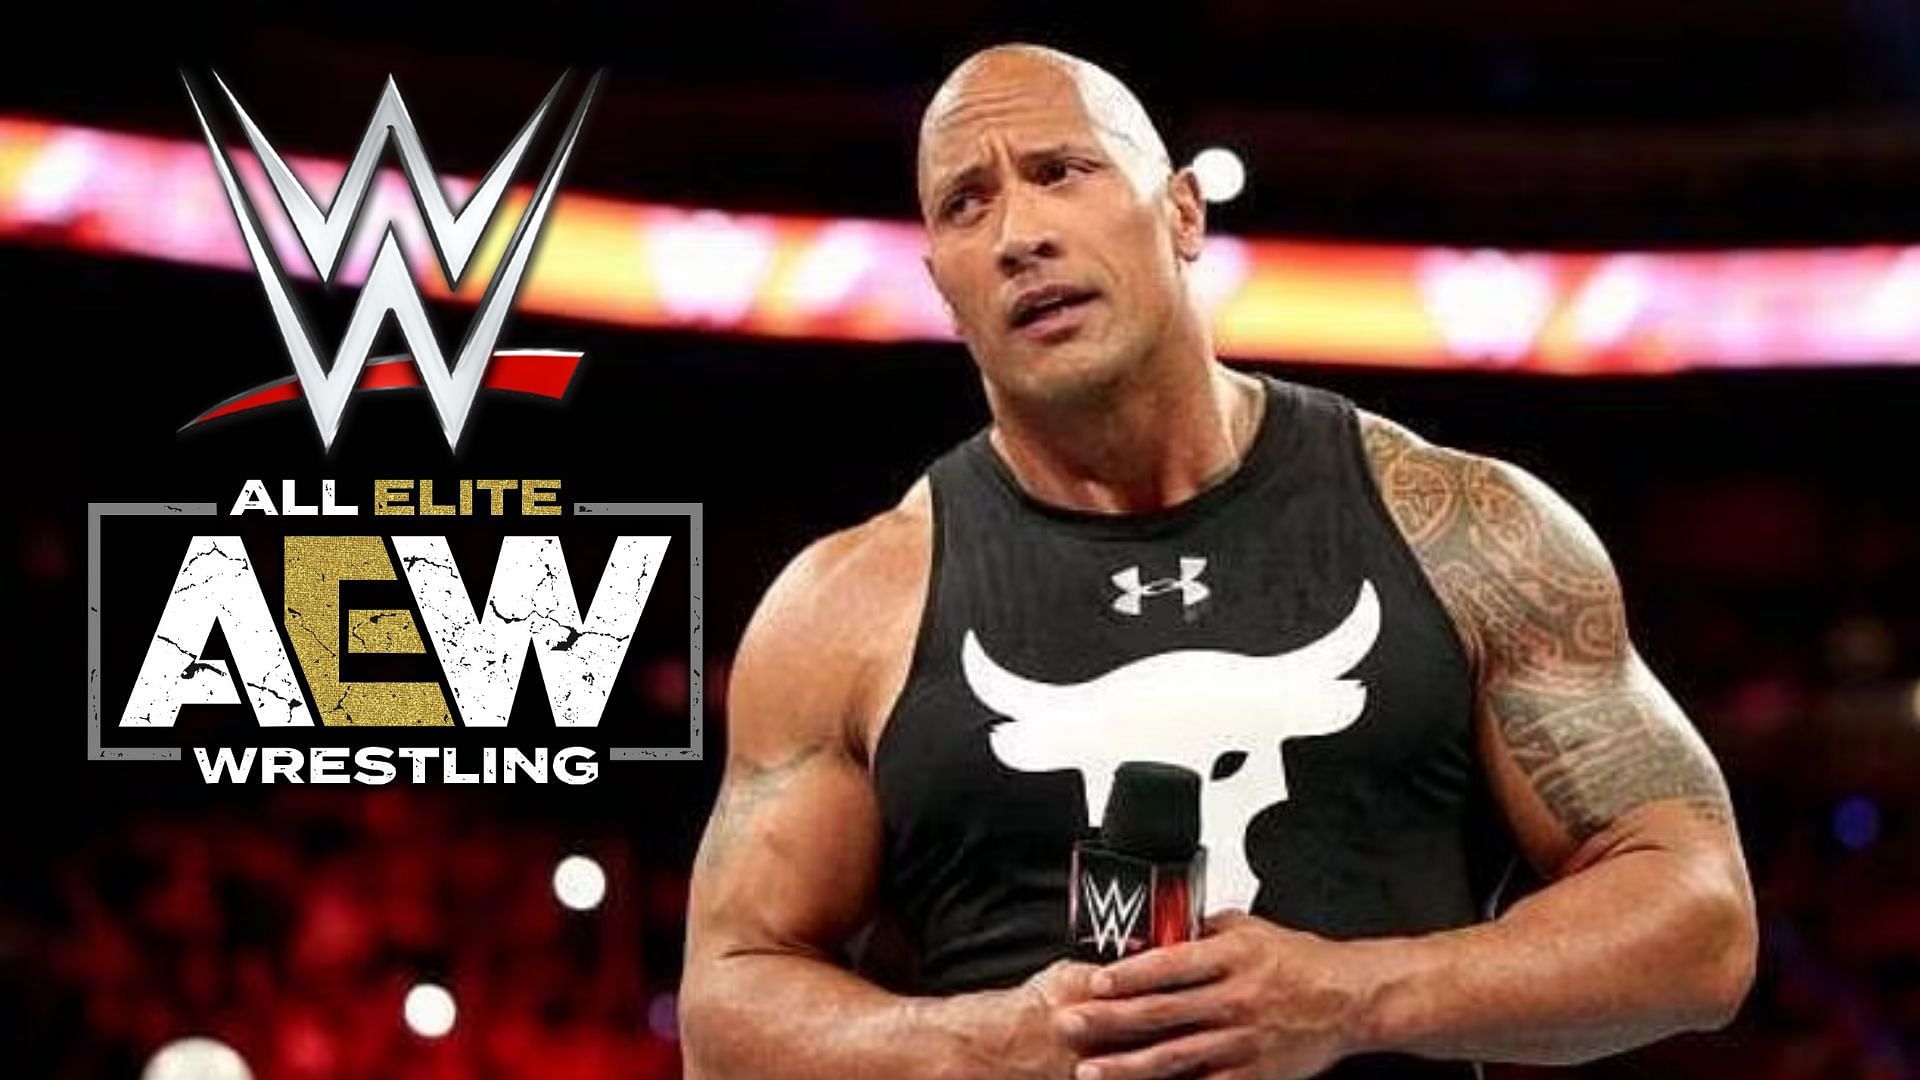 The Rock was recently mentioned in a tweet by an AEW star